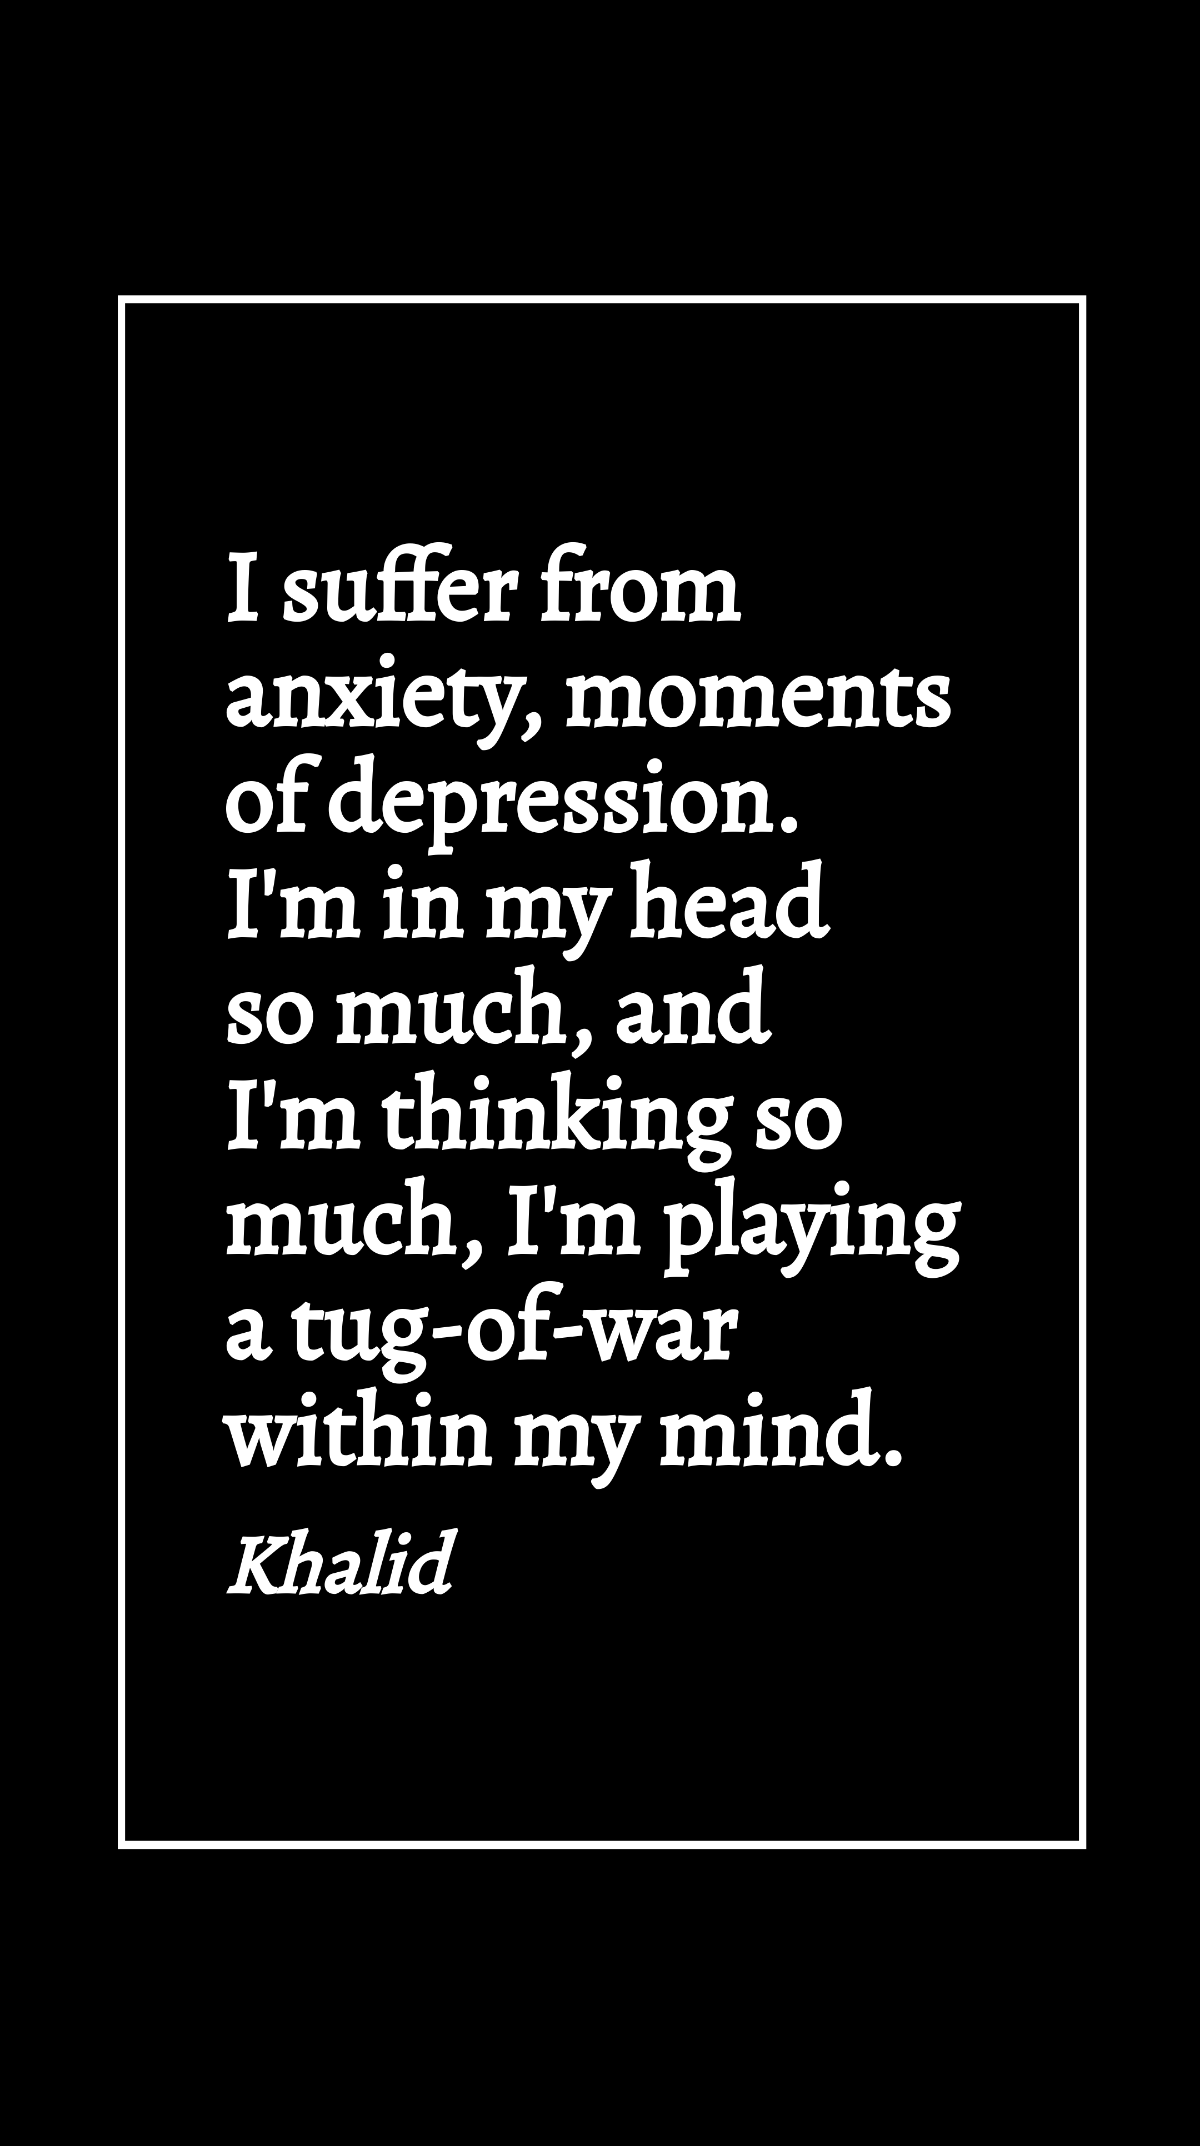 Khalid - I suffer from anxiety, moments of depression. I'm in my head so much, and I'm thinking so much, I'm playing a tug-of-war within my mind. Template